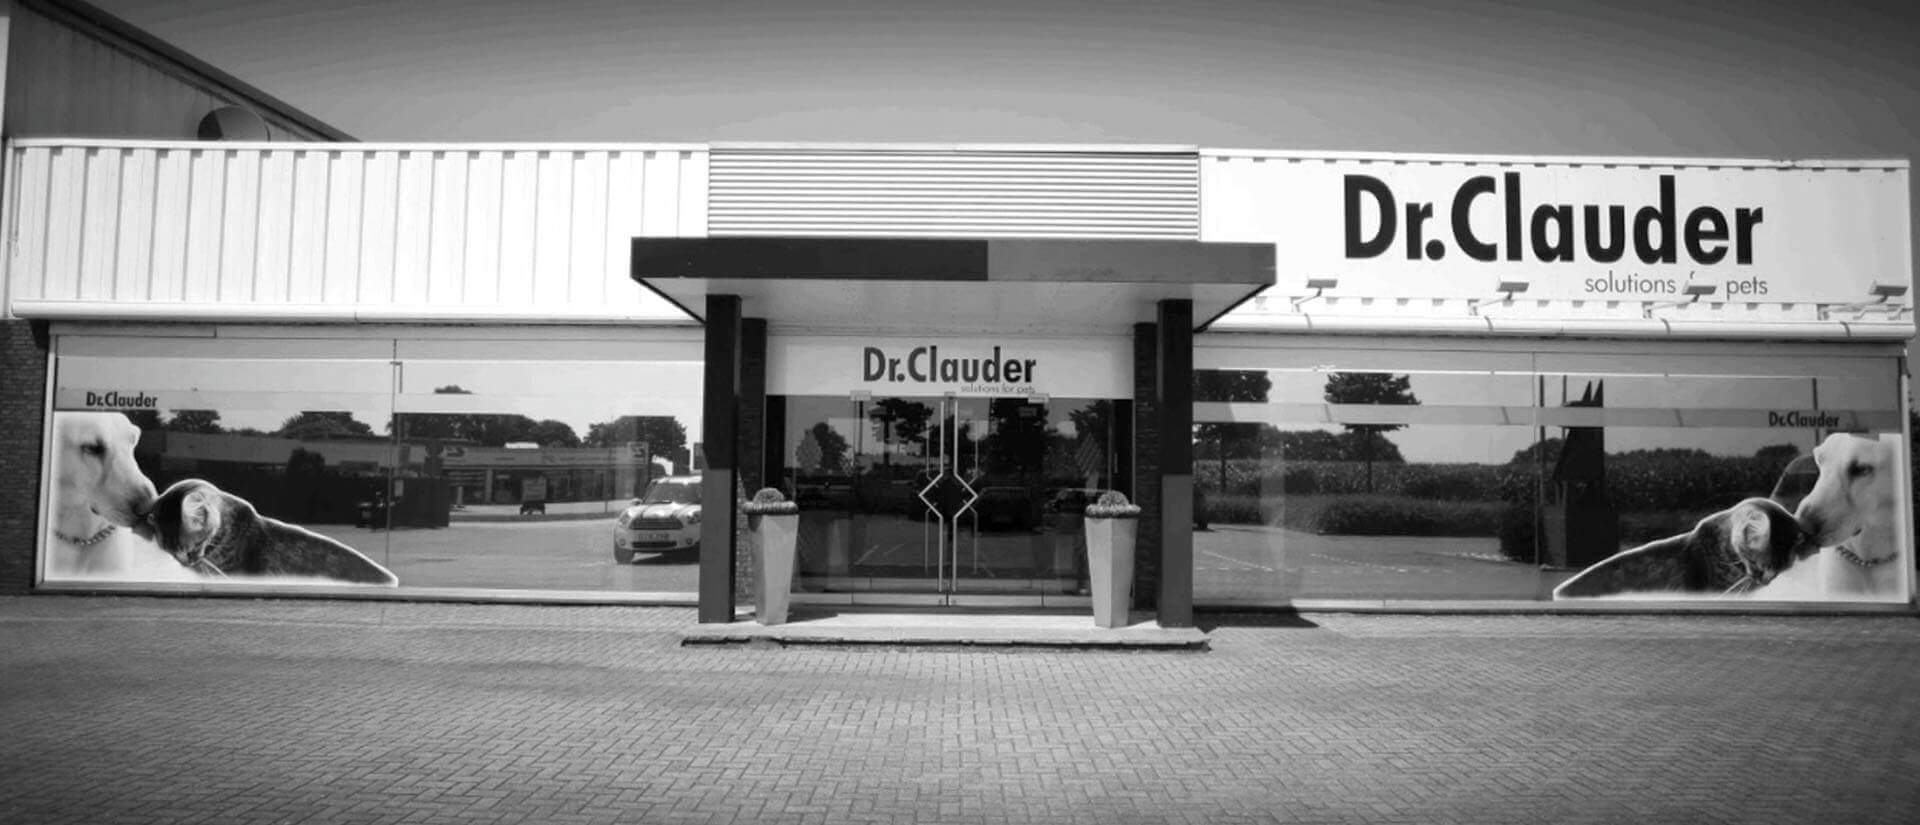 Who is Dr.Clauder?